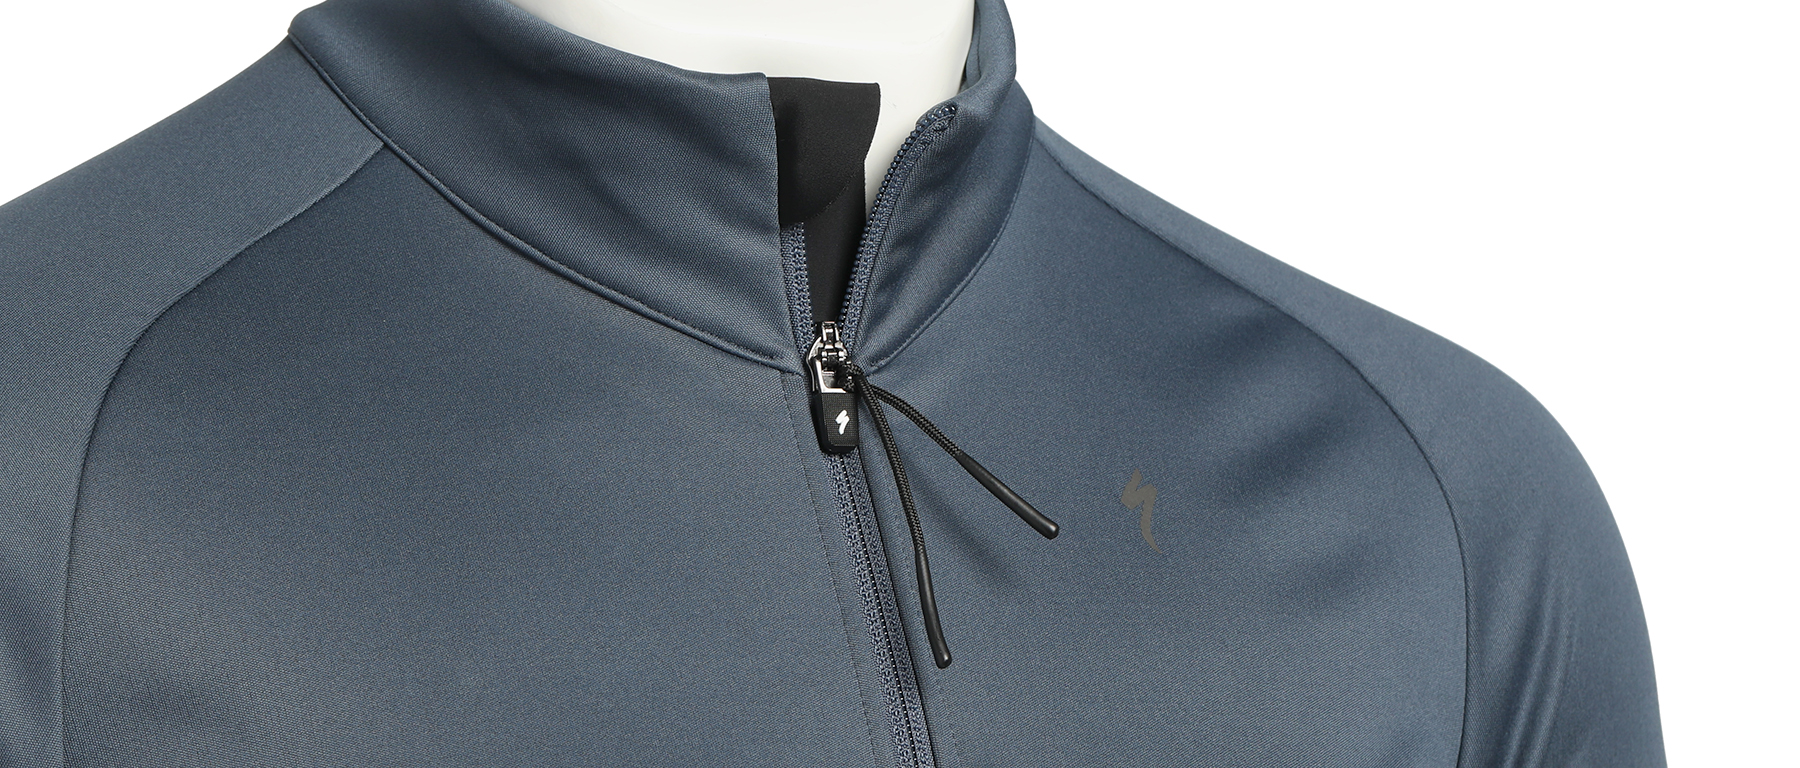 Specialized RBX Comp Softshell Jacket